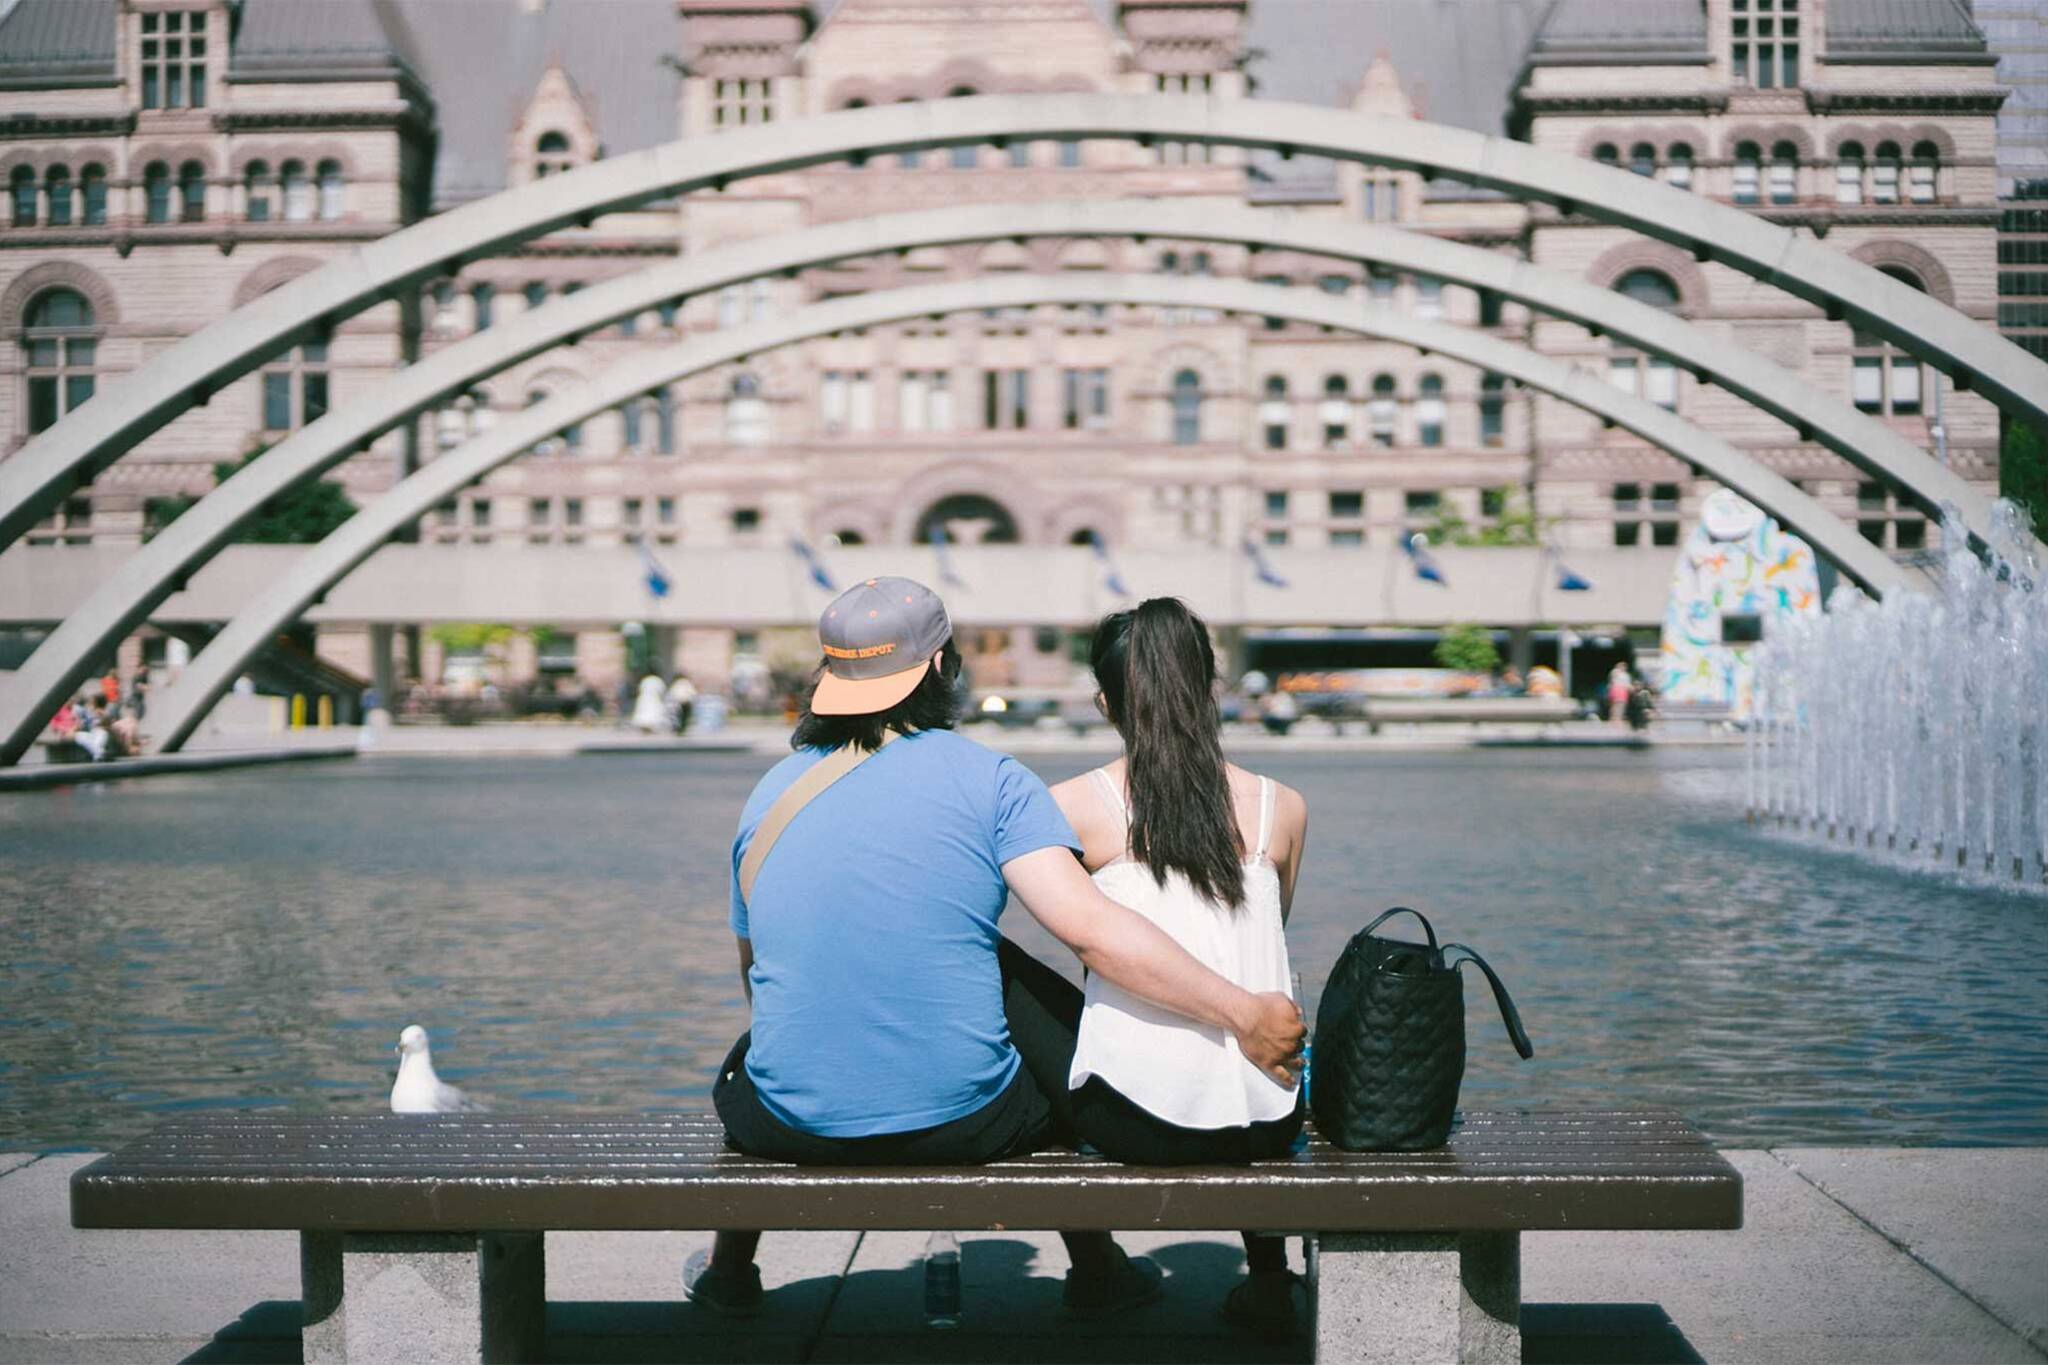 The 5 Best Dating Sites in Canada (What I Learned)